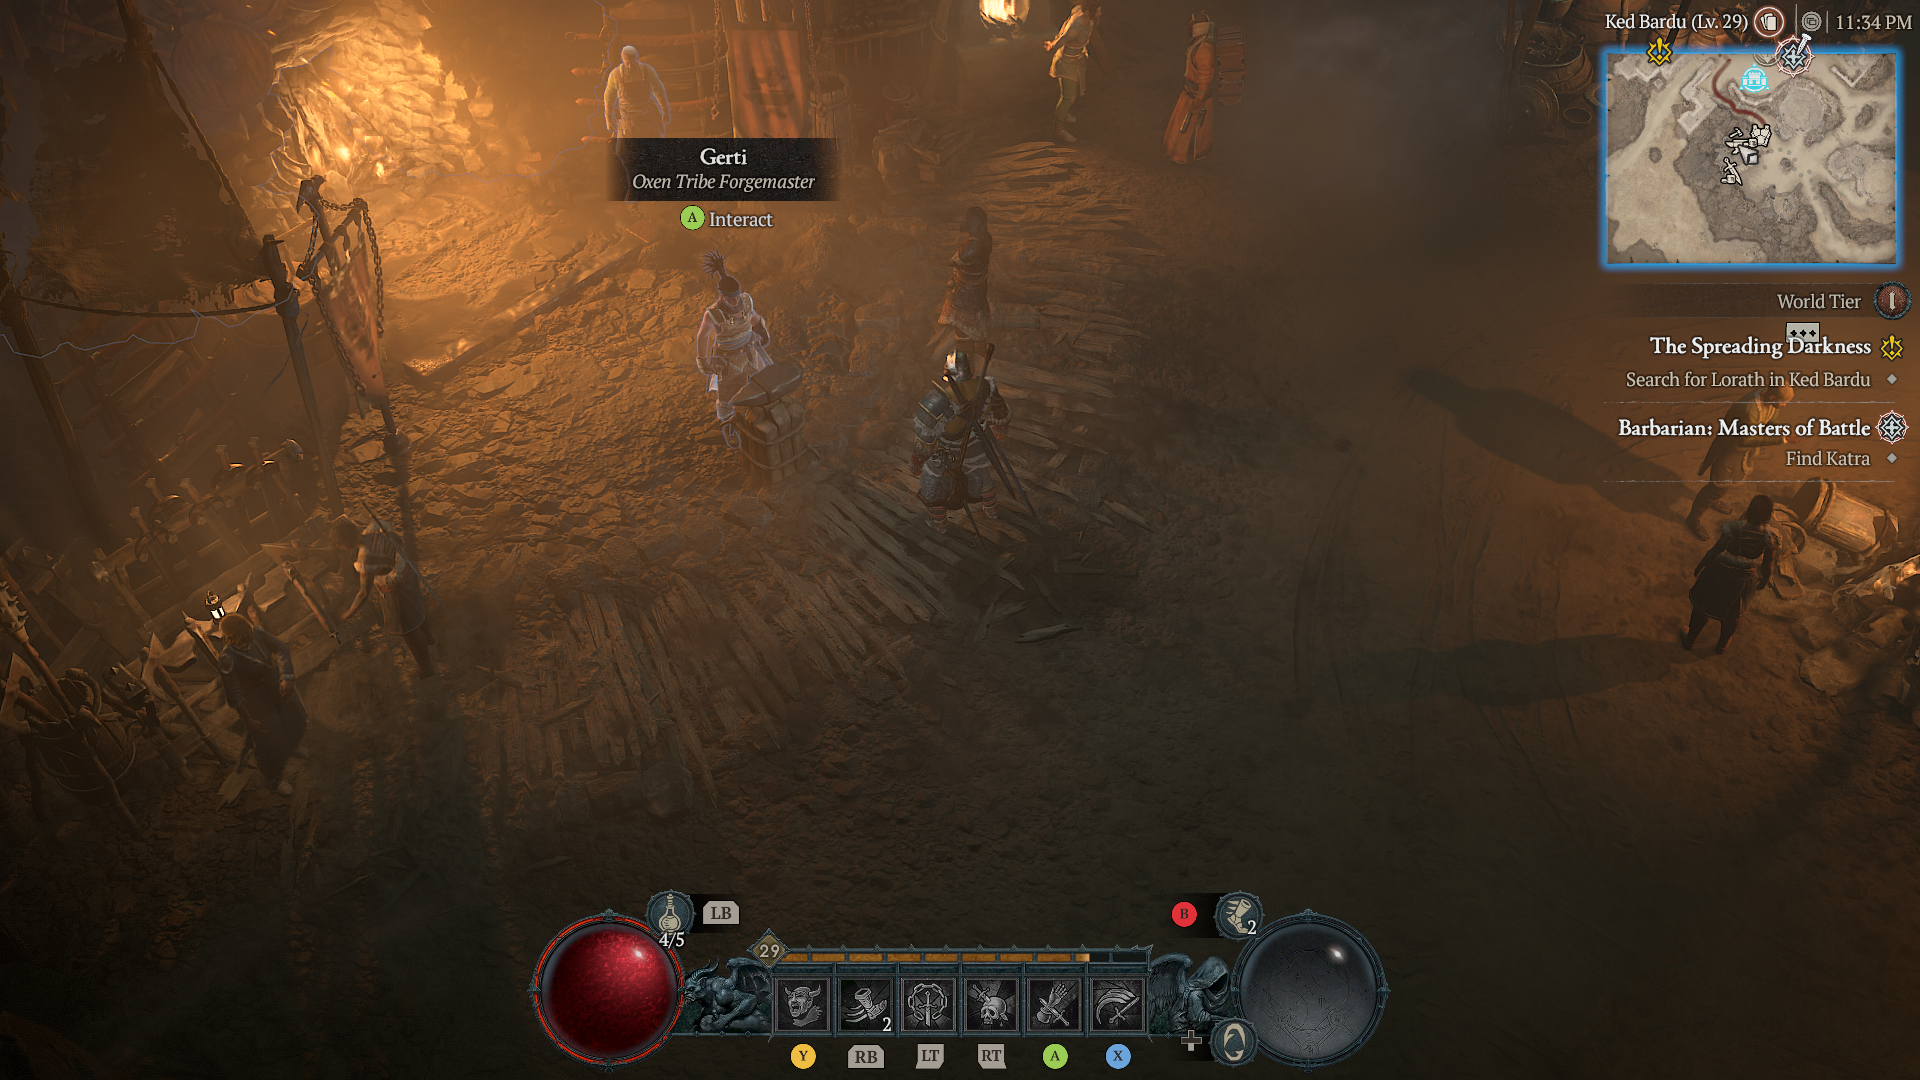 Image of Forgemaster in the Barbarian Class Quest in Diablo 4.